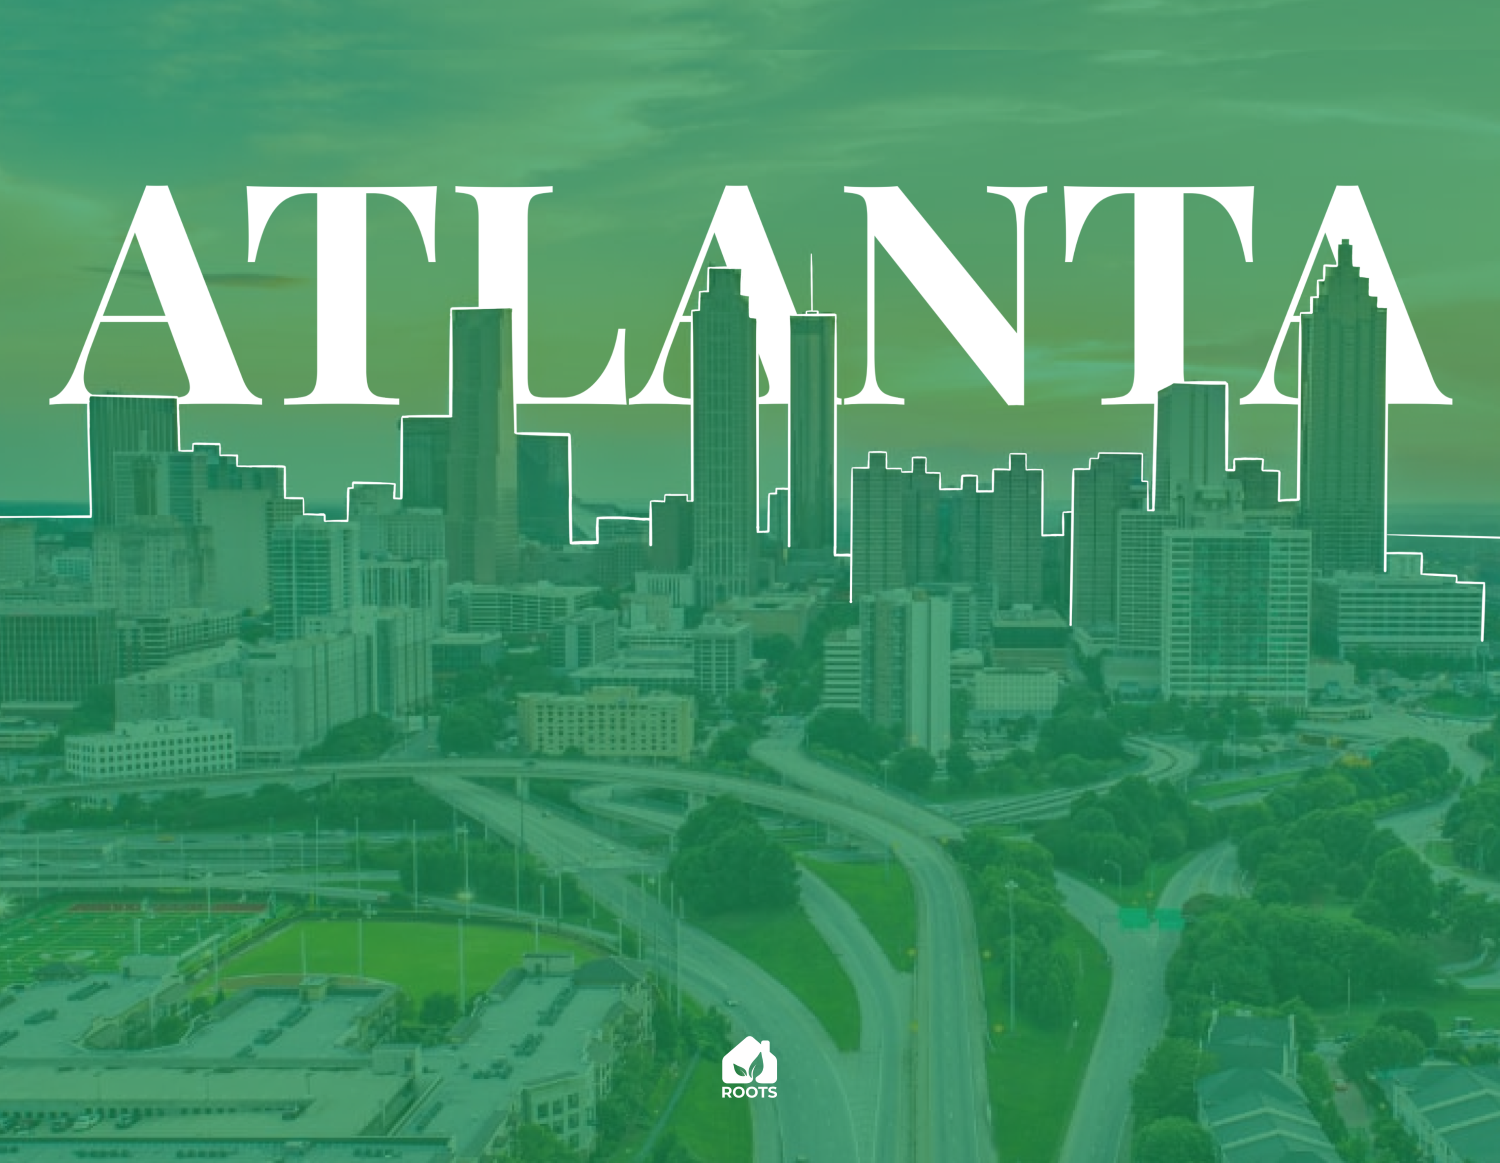 Why Invest in Atlanta Real Estate?